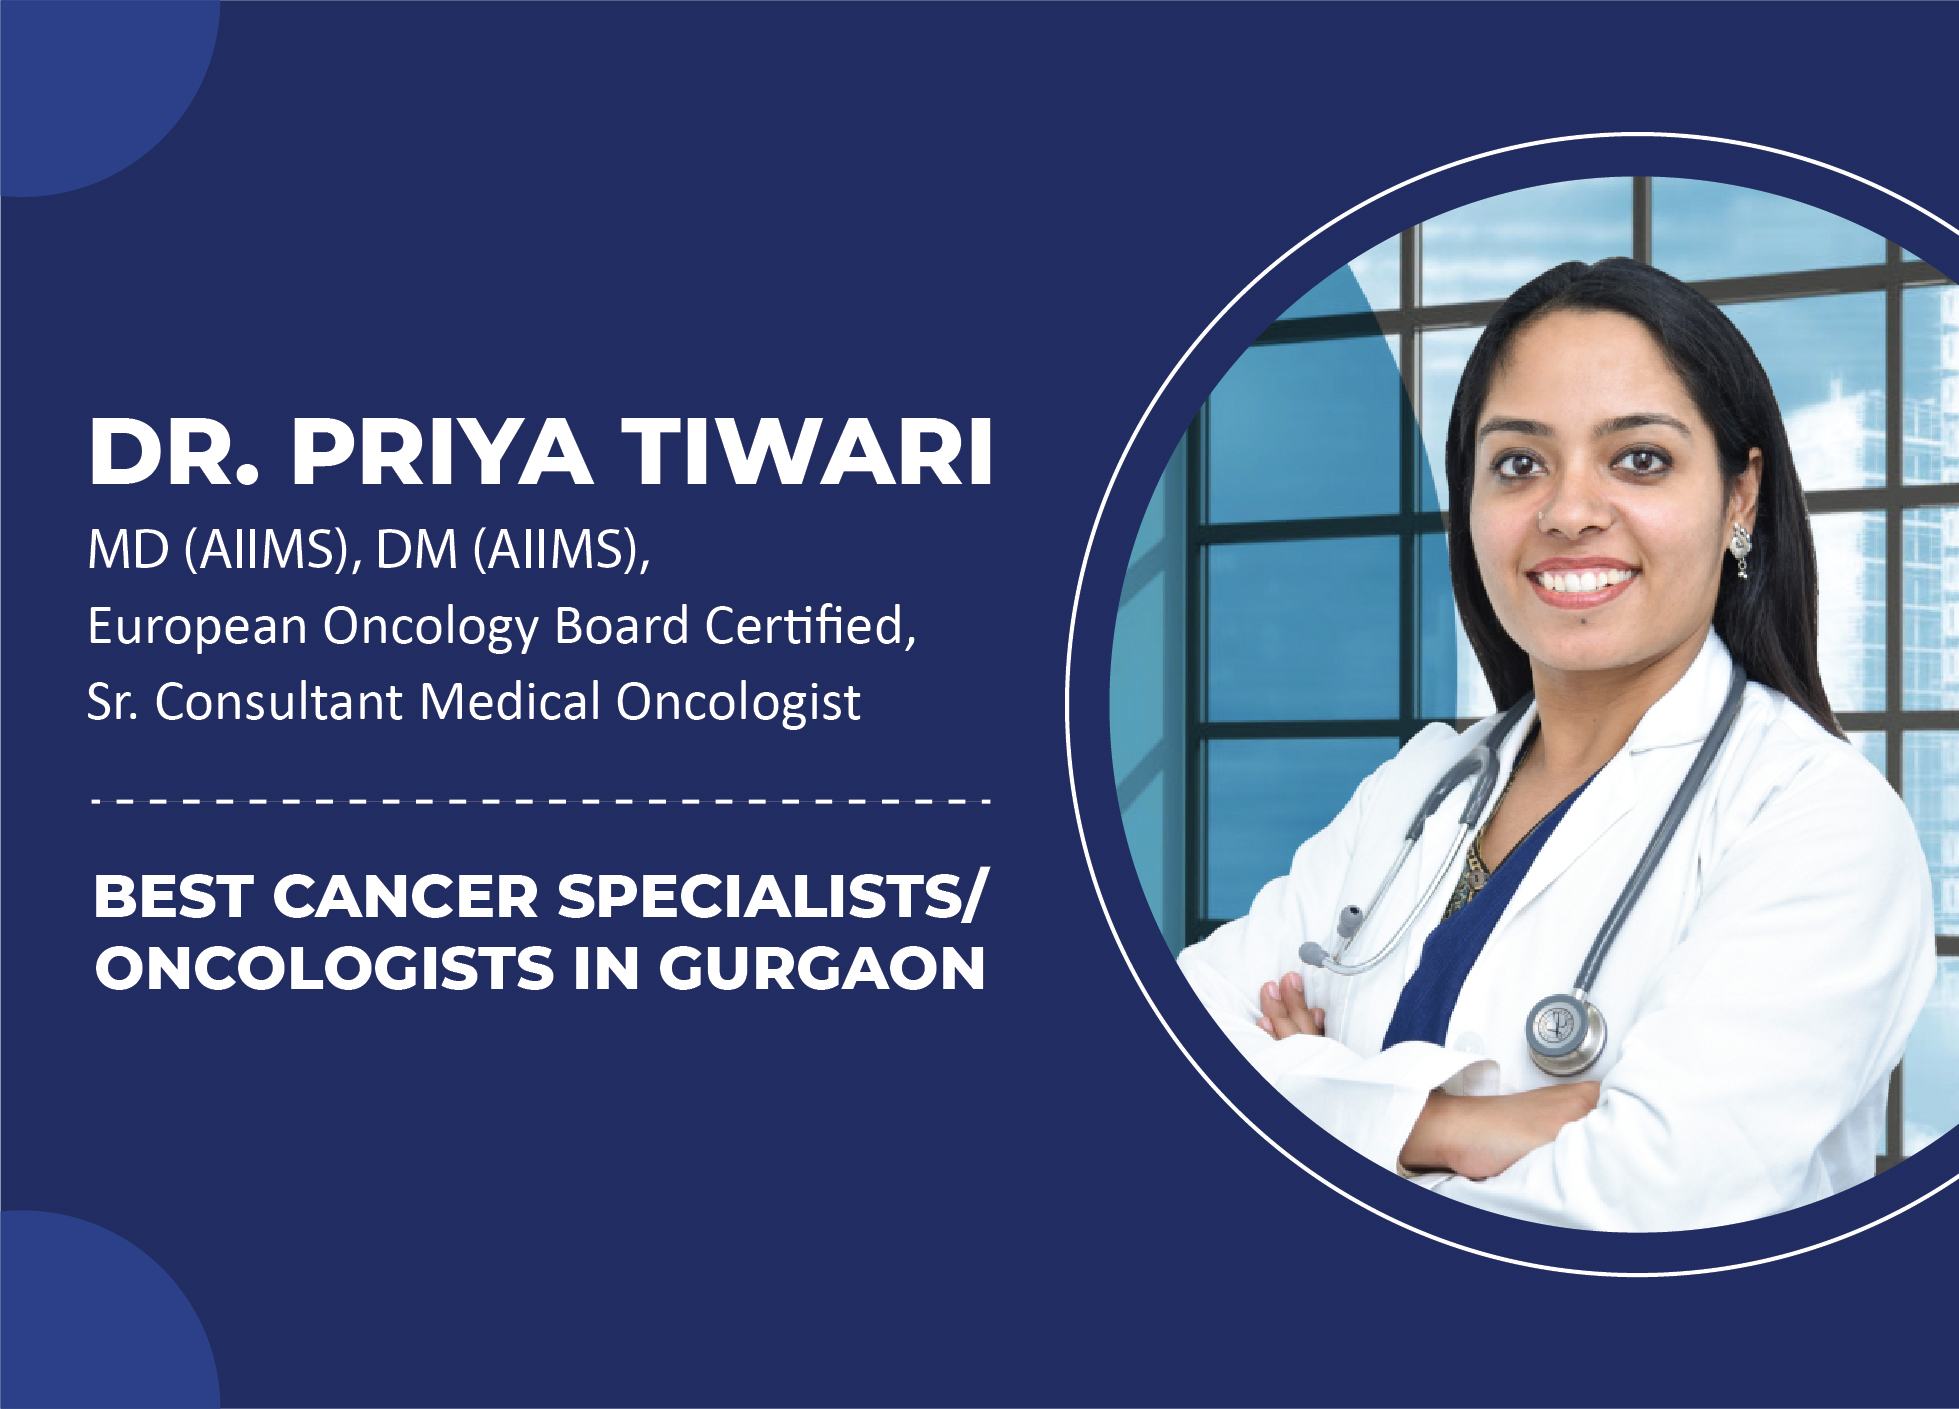 Best Cancer Specialists in Gurgaon